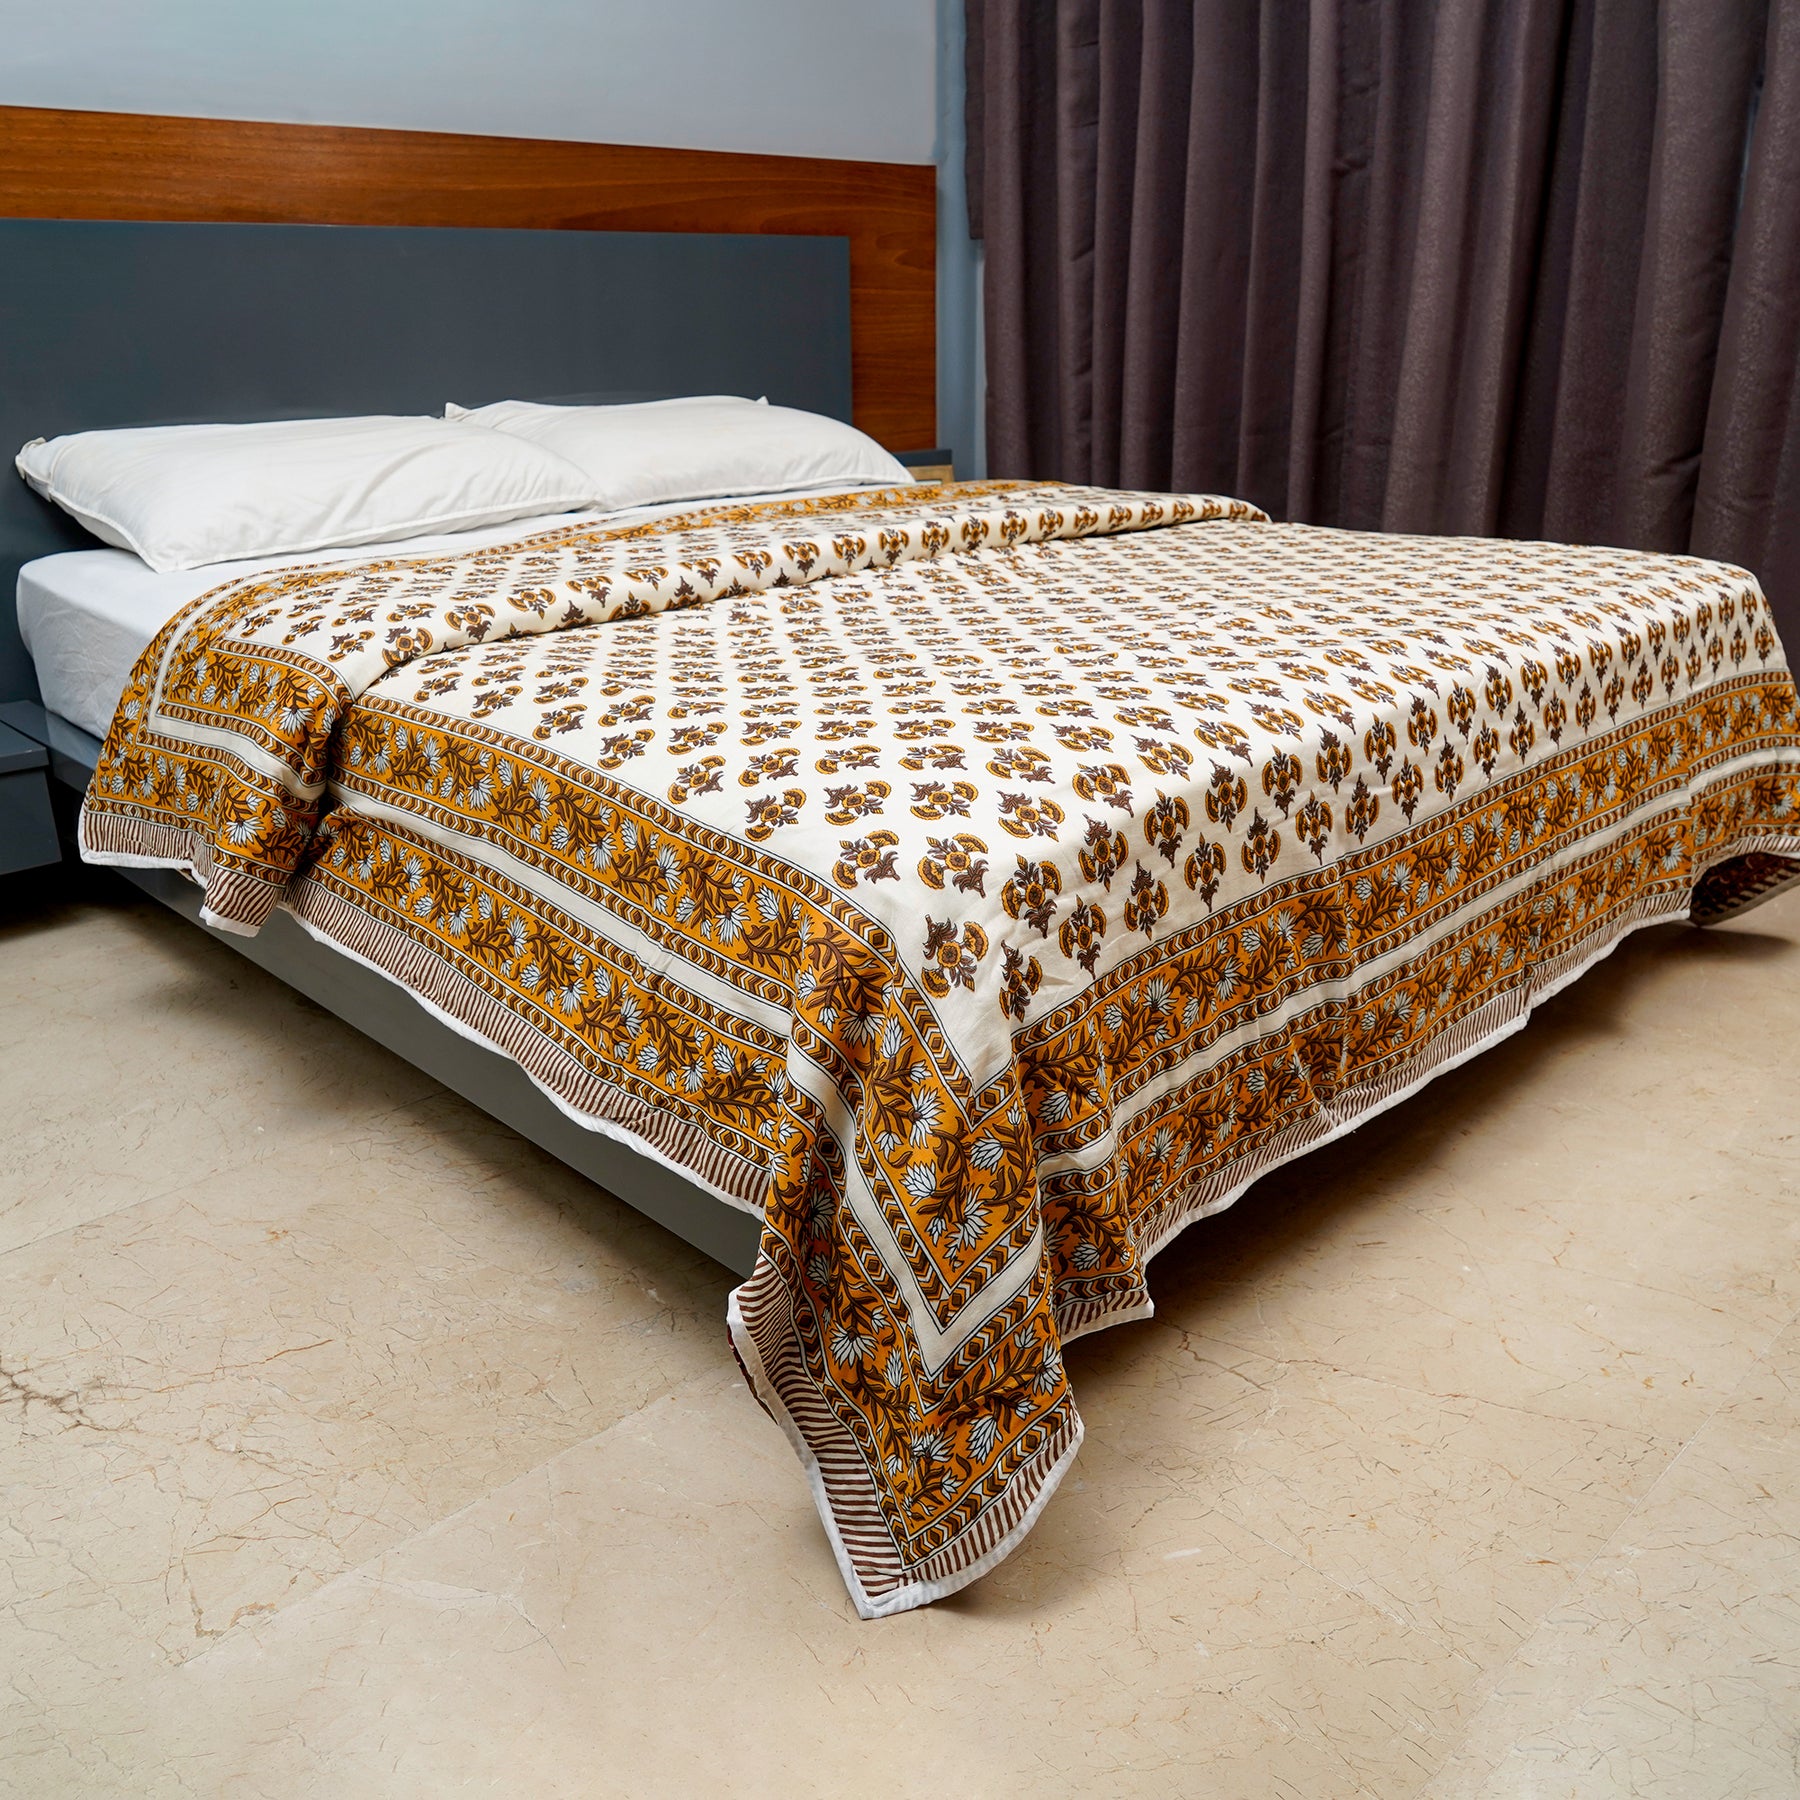 Inizio Cotton Double Bed AC Dohar Reversible Two Side Mulmul Printed Rajasthani Blanket Rajai with Hand Block Border Pattern Elegant and Ultra-Soft